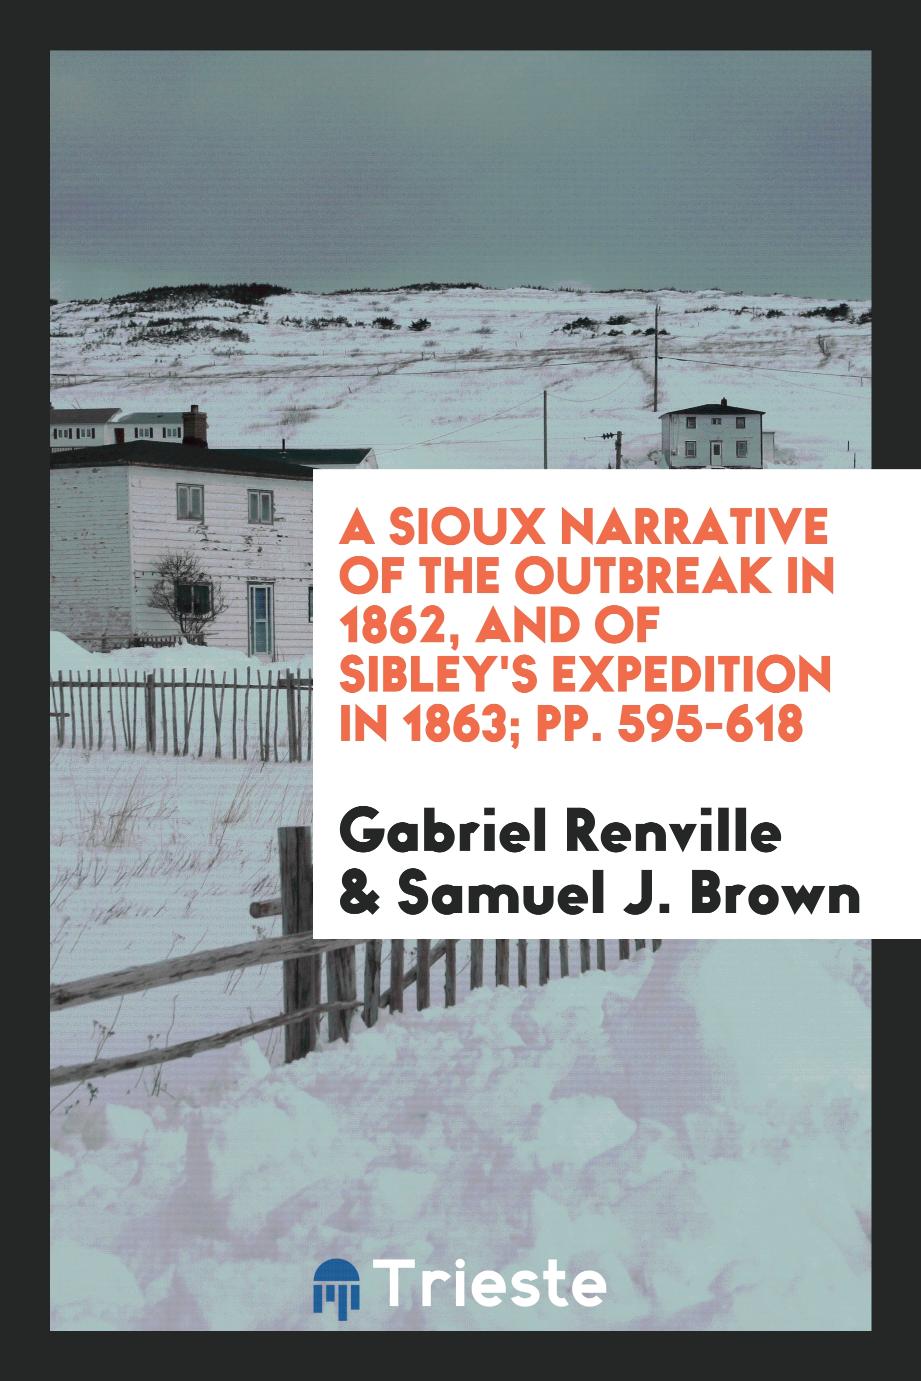 A Sioux Narrative of the Outbreak in 1862, and of Sibley's Expedition in 1863; pp. 595-618